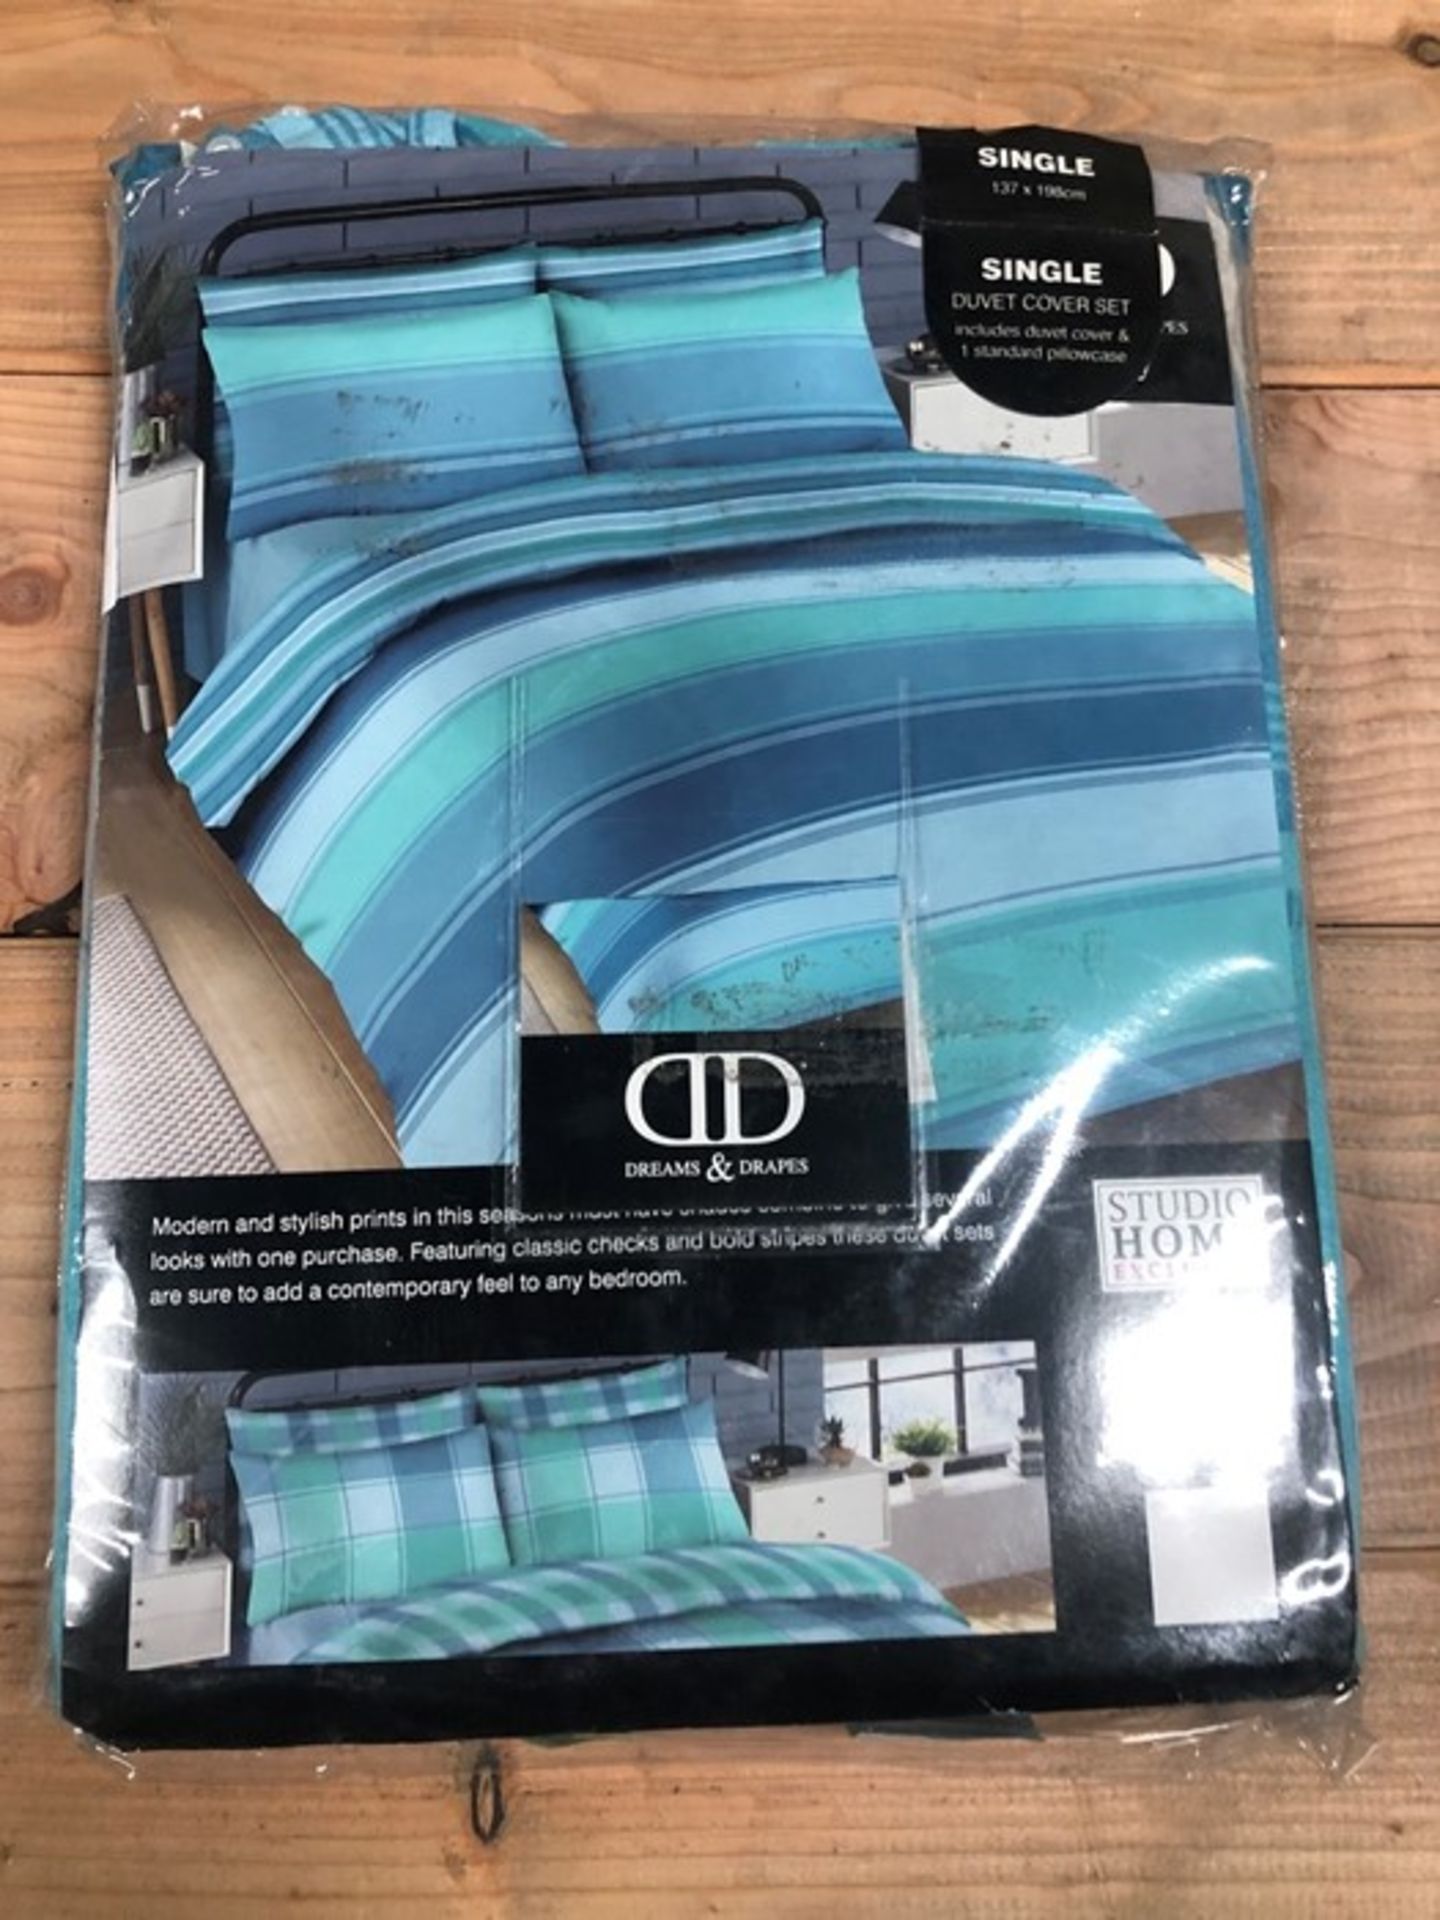 1 BAGGED BROMPTON DUVET SET IN BLUE/GREEN / SIZE SINGLE (PUBLIC VIEWING AVAILABLE)